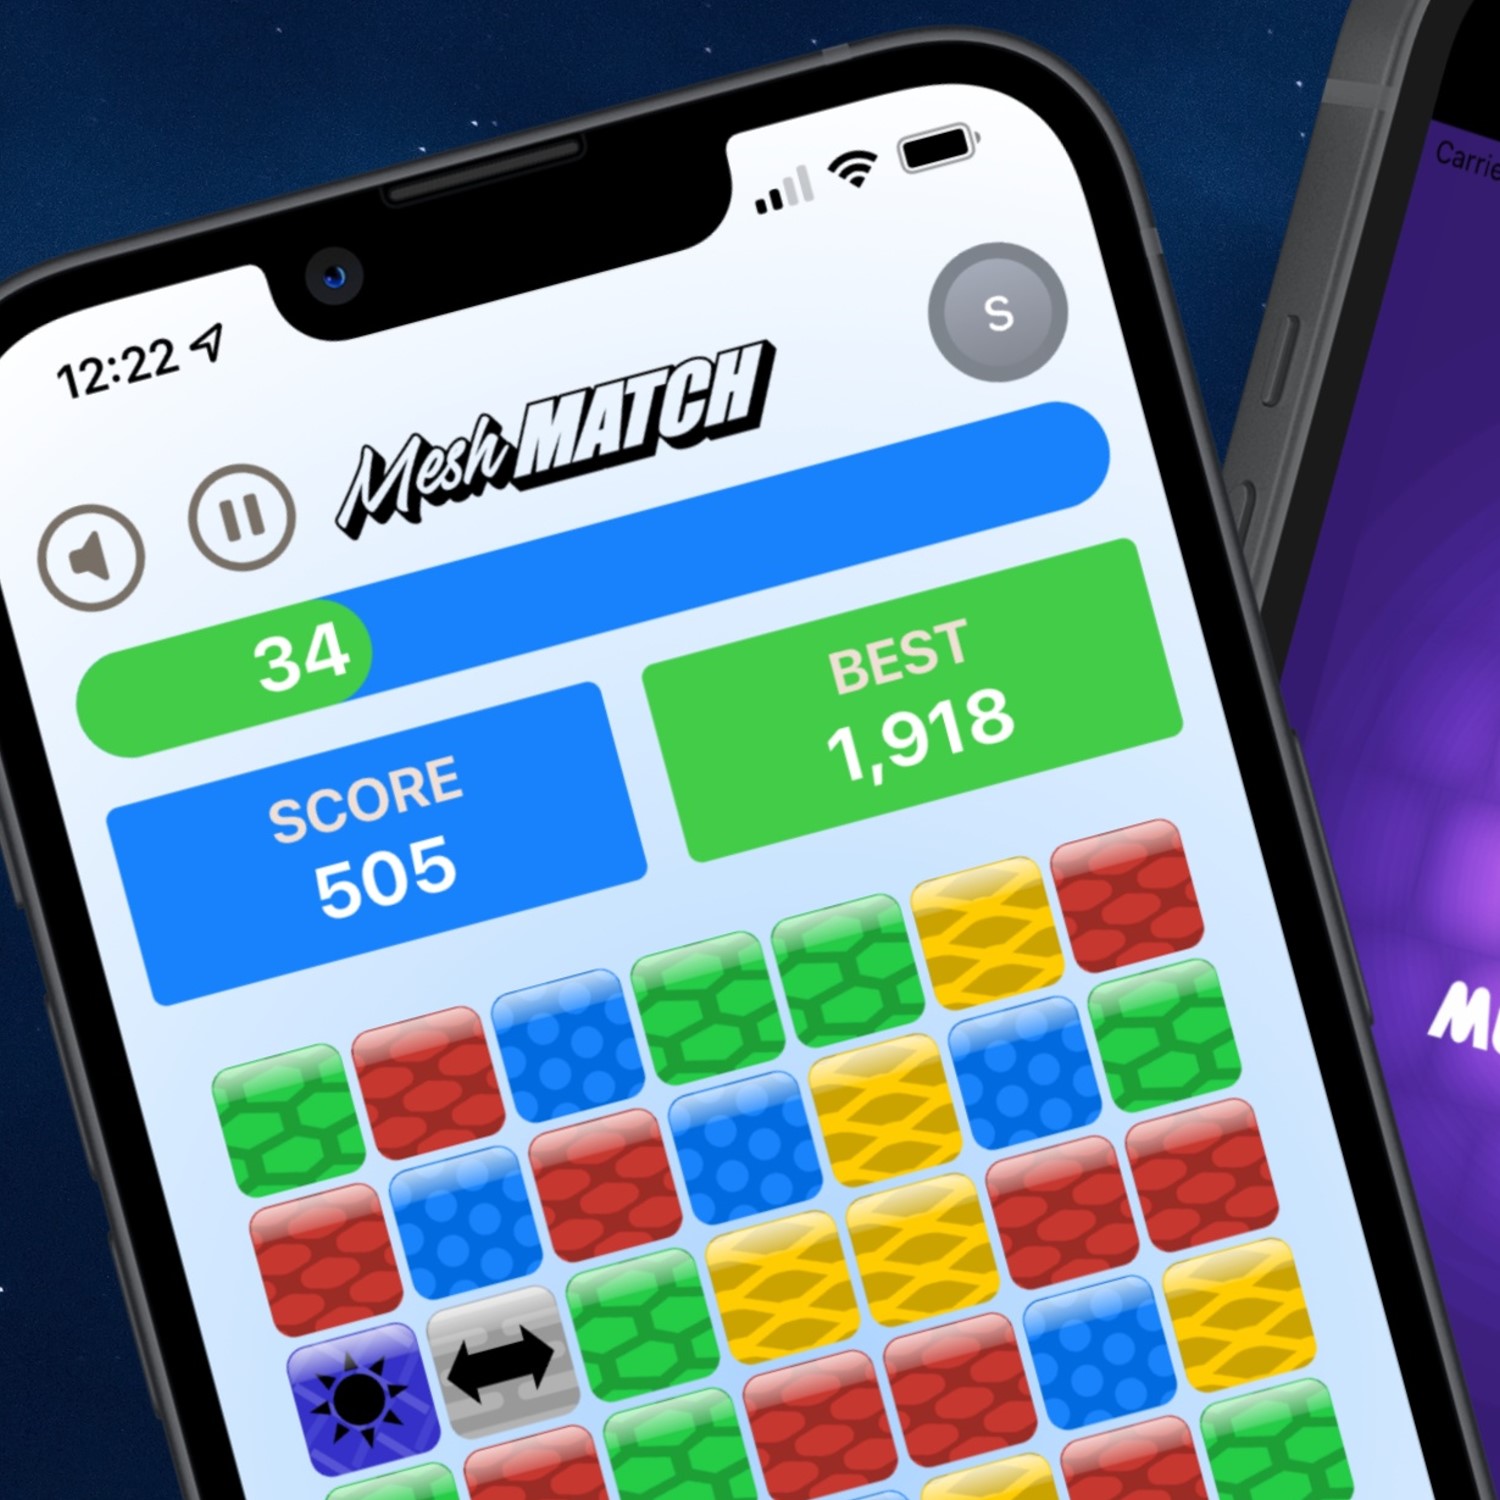 Mesh Match: Addictive Puzzle Fun with Grille Mesh Color Matching Game on iOS